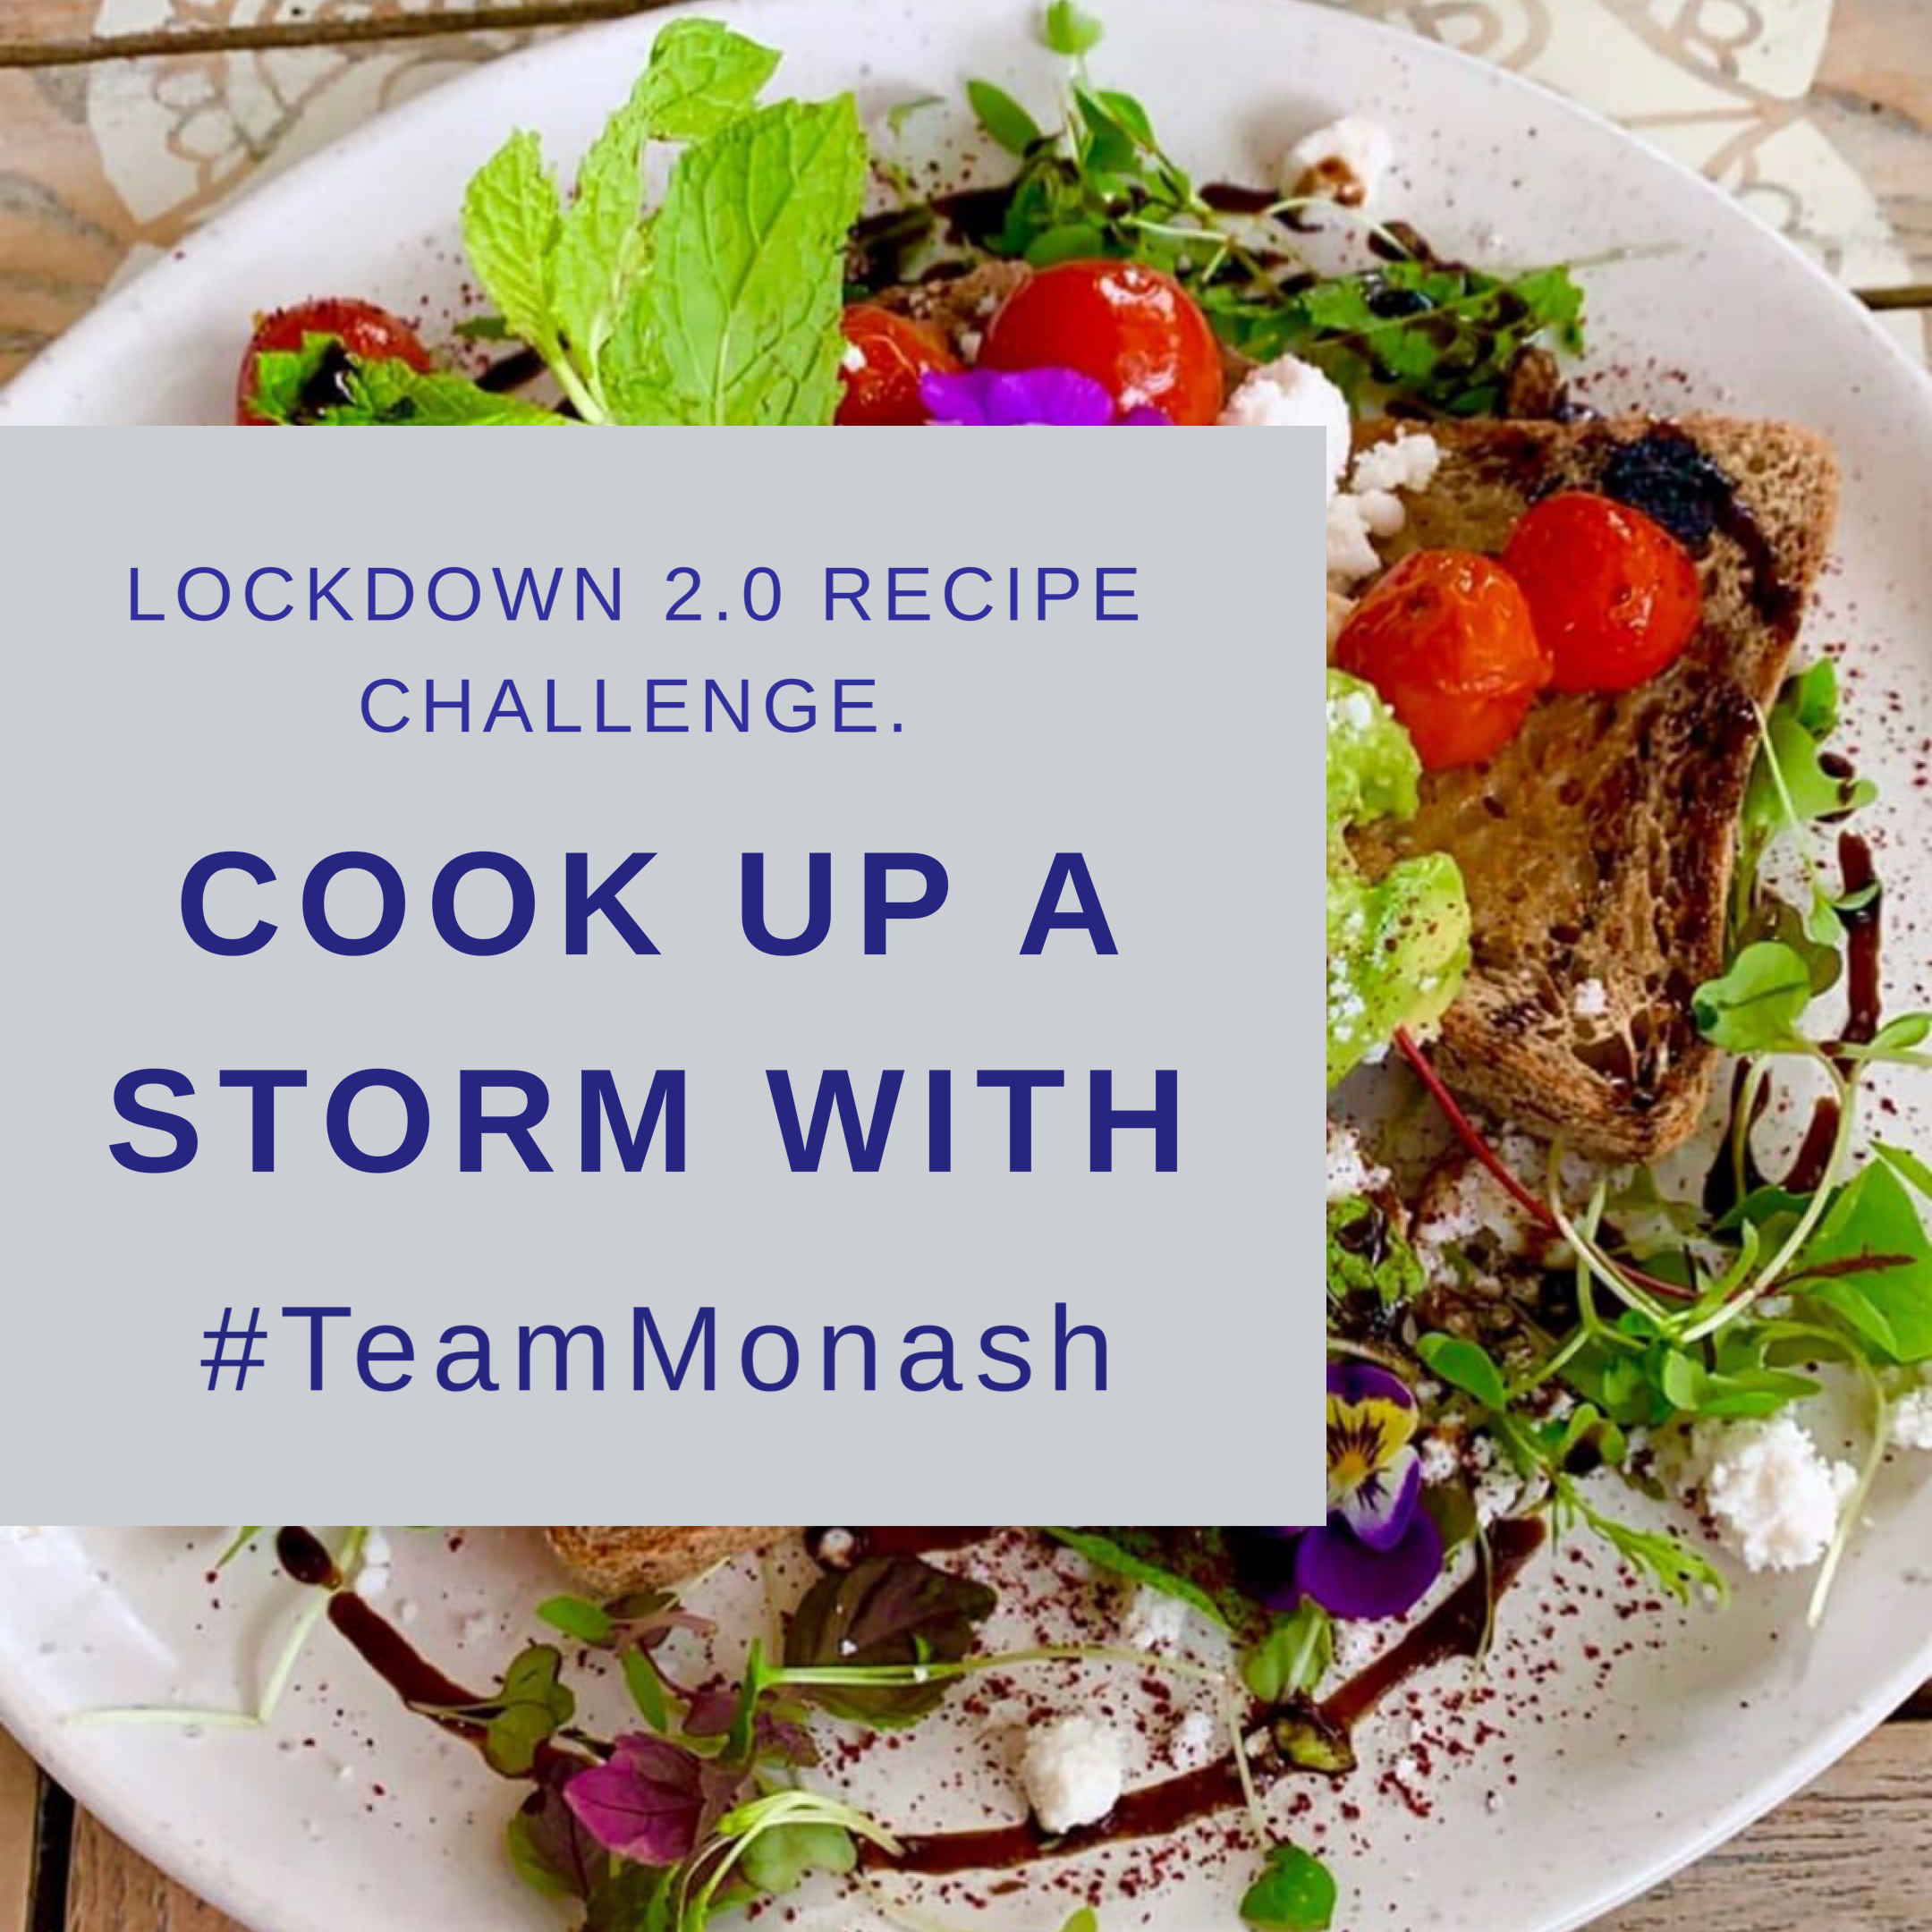 ‘Cooking Up a Storm’ - Lockdown 2.0 recipe challenge